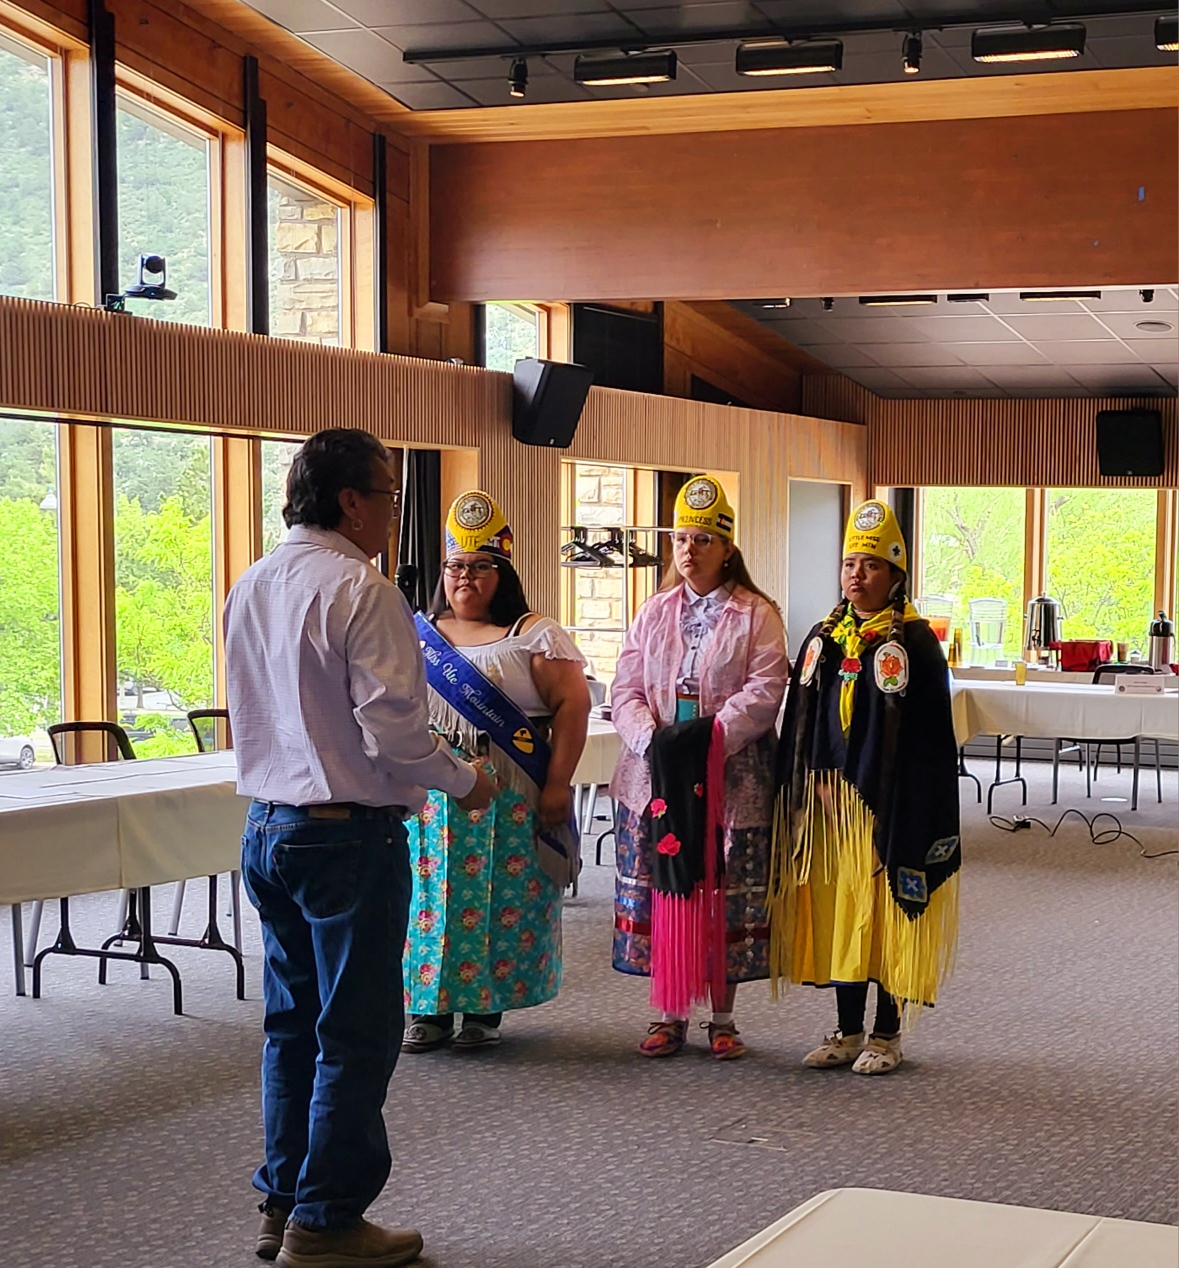 Chairman Heart of the Ute Mountain Ute Tribe leads a Bear Dance demonstration at the June 2023 CCIA Quarterly meeting.